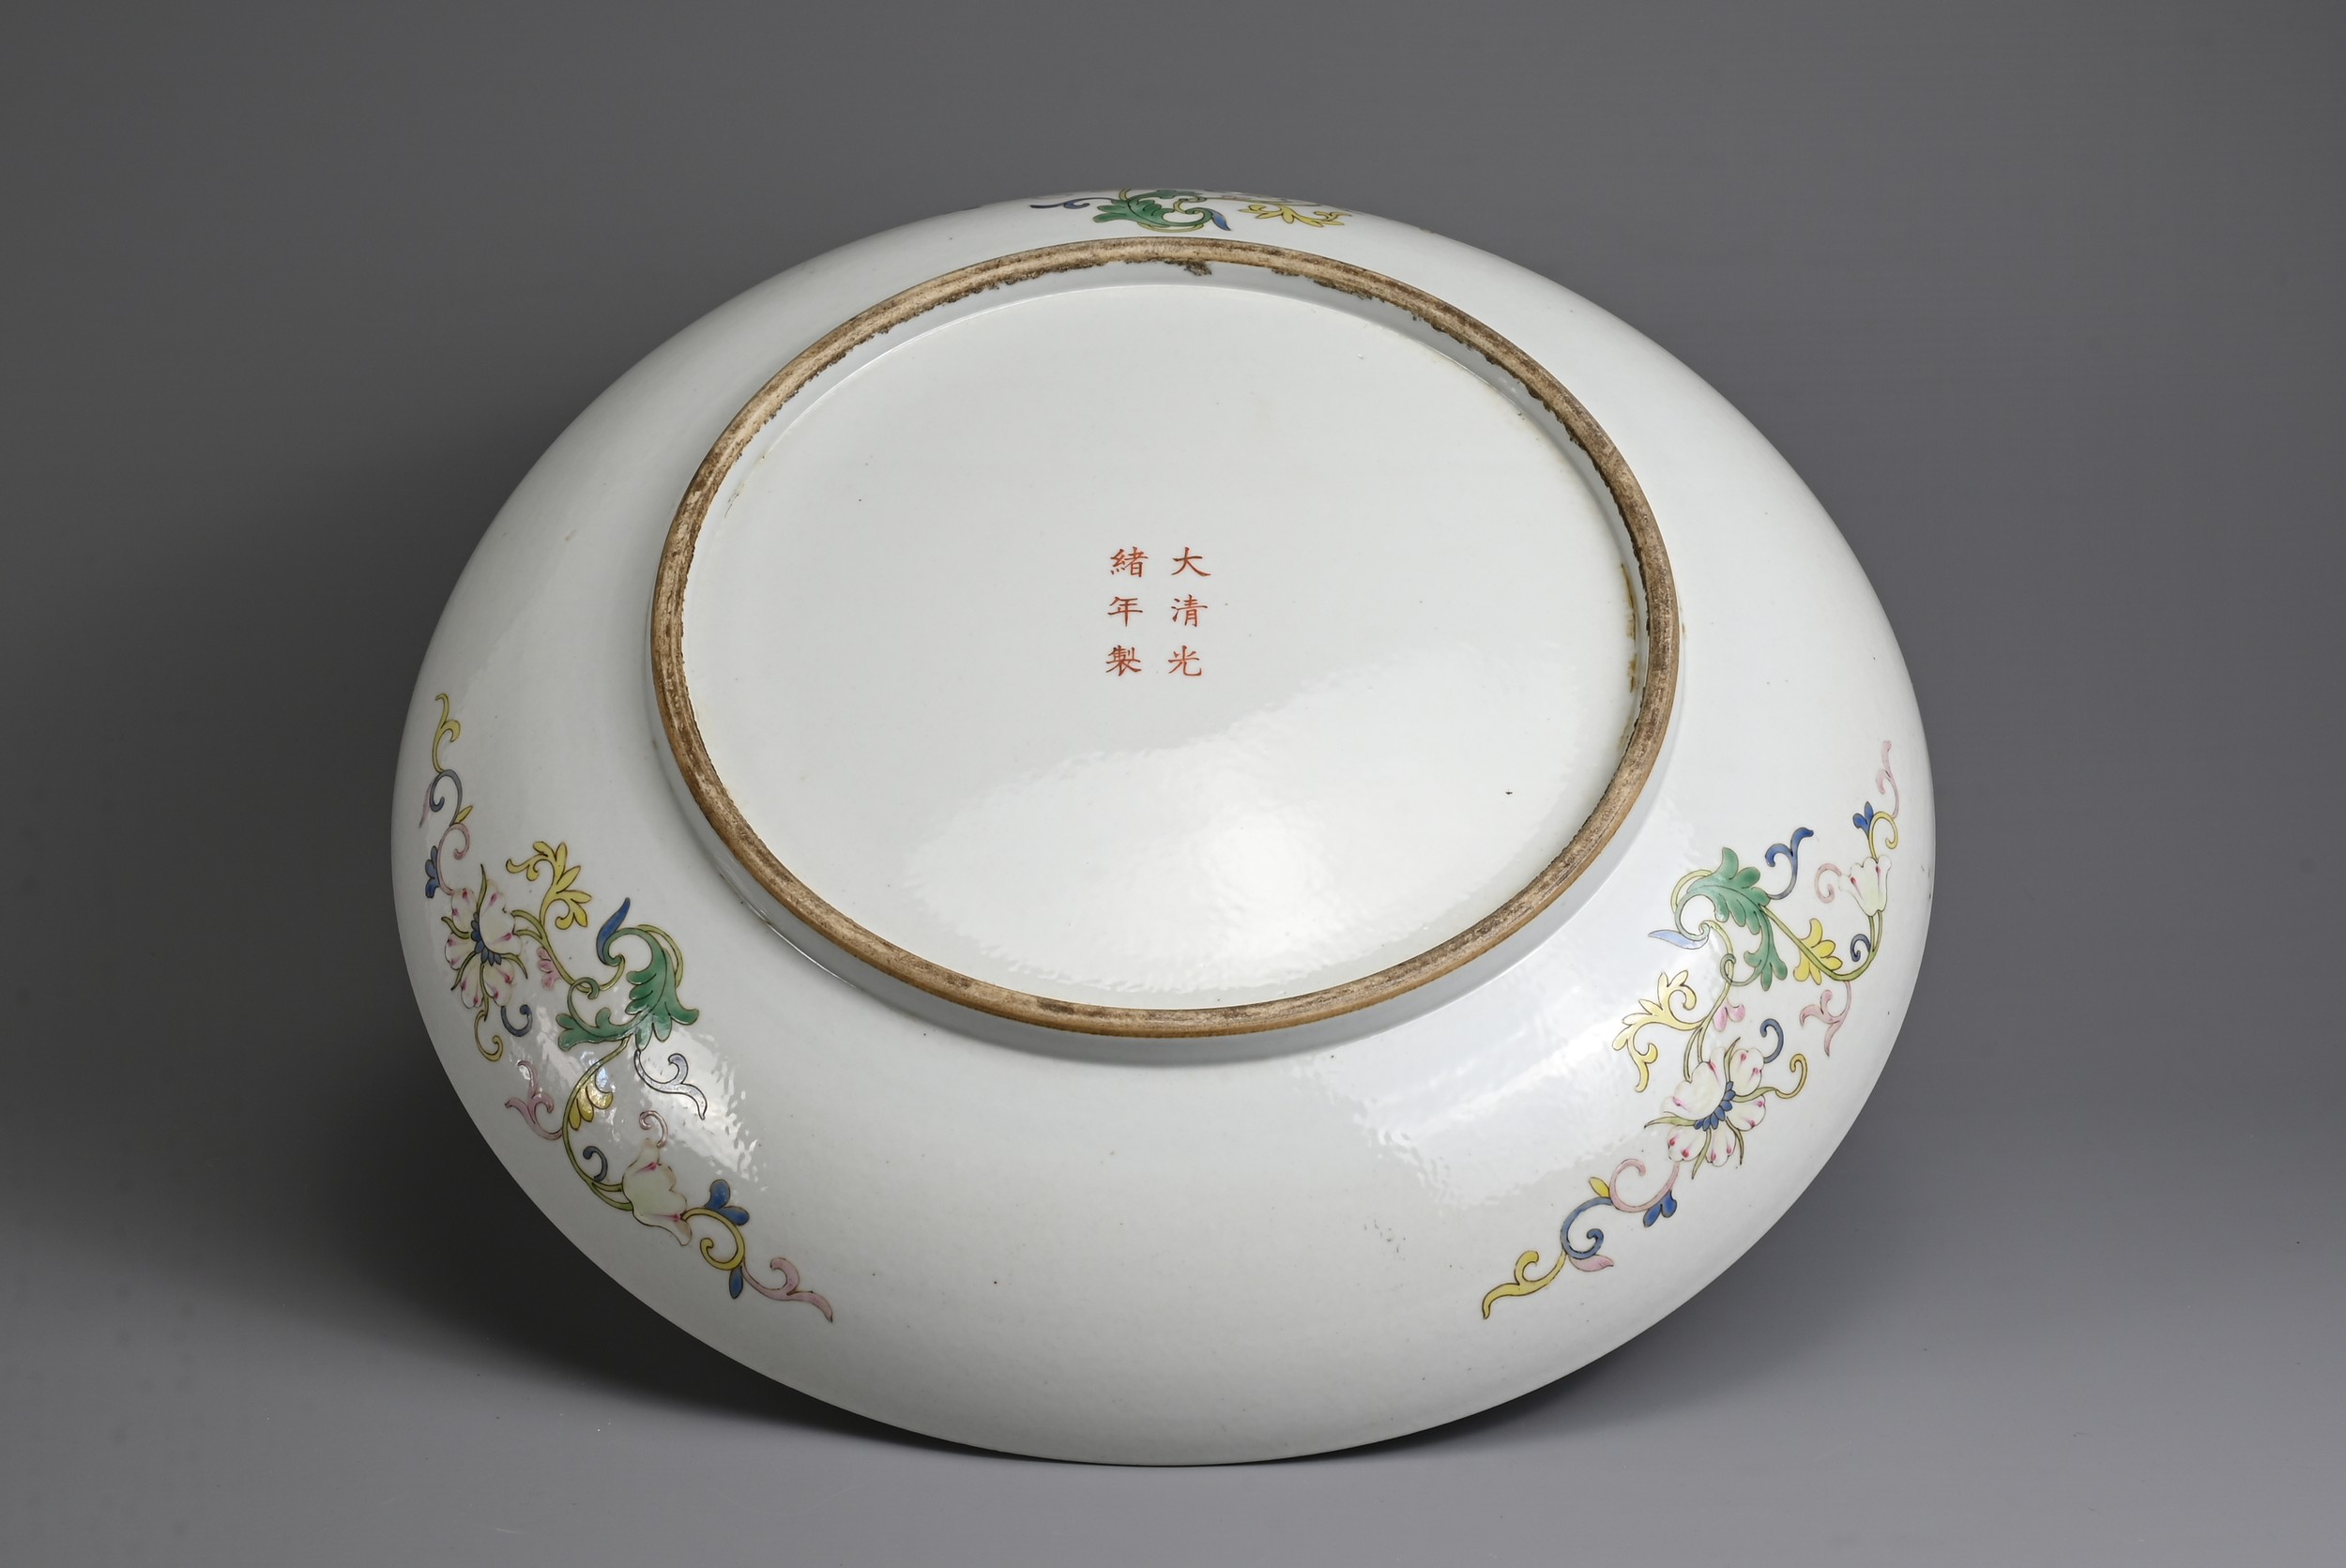 A LARGE CHINESE FAMILLE ROSE PORCELAIN DRAGON DISH, 19/20TH CENTURY. With deep rounded sides - Image 6 of 10